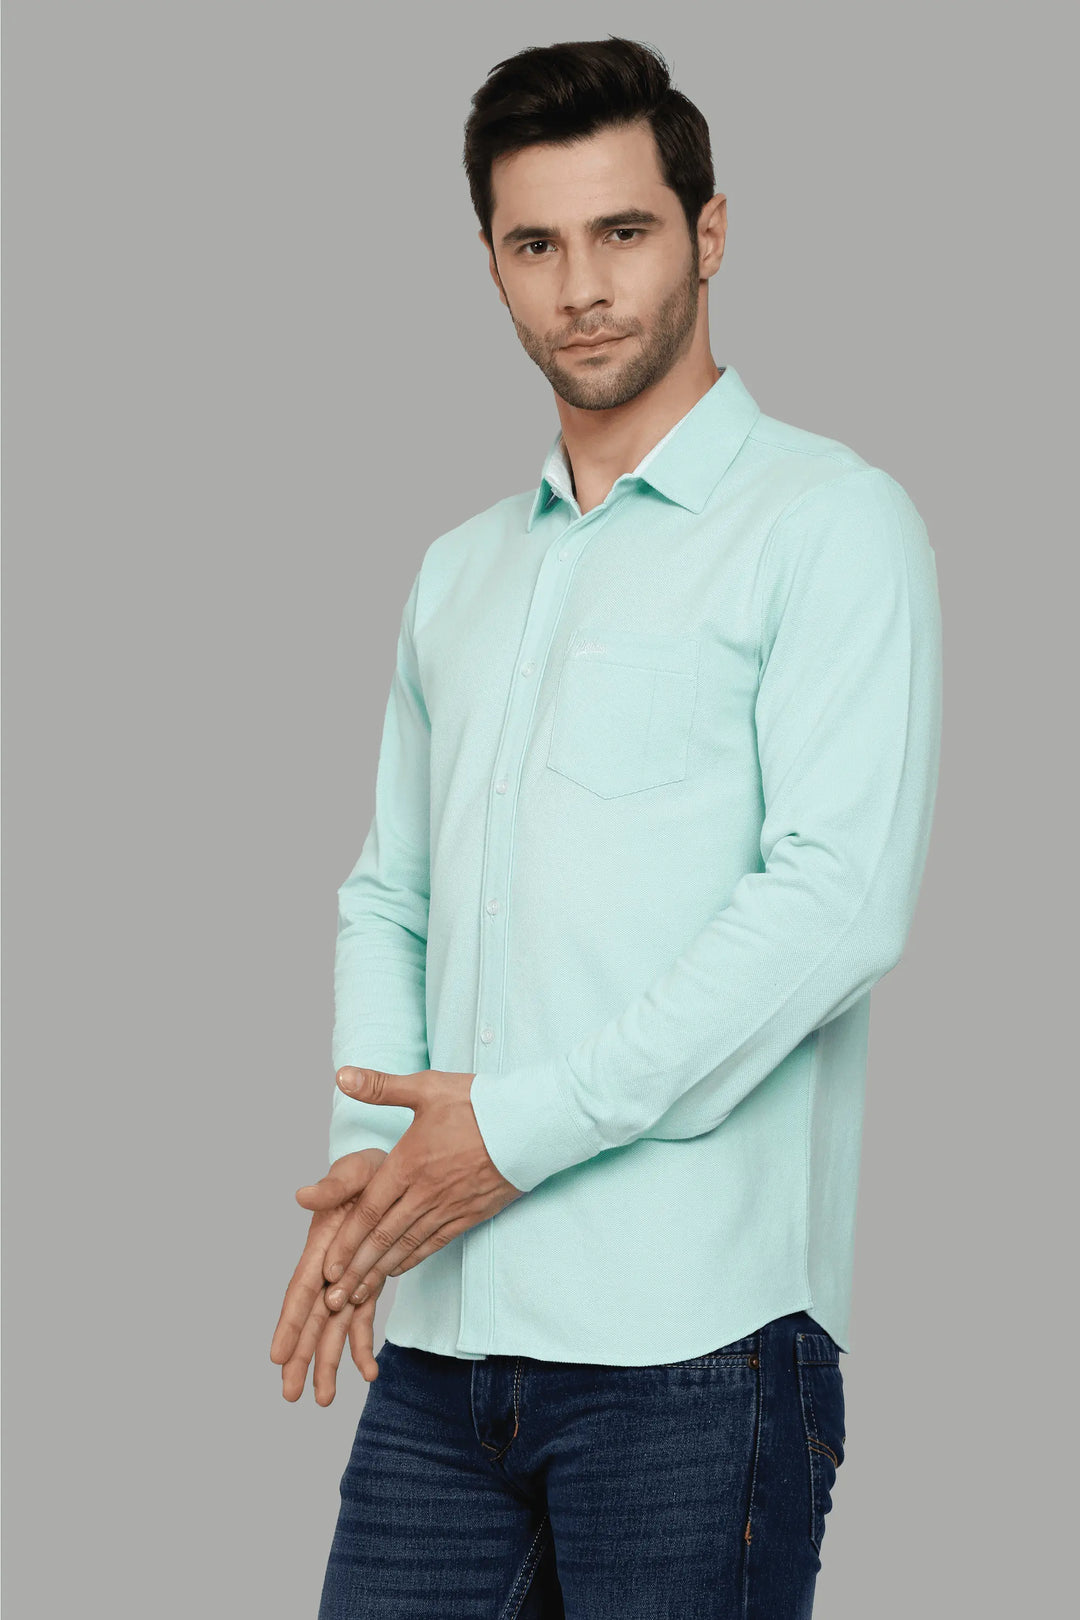 Best party wear full Sleeve Polo shirt in mens fashion . And it's conmfortable and perfect look in reasonable price.